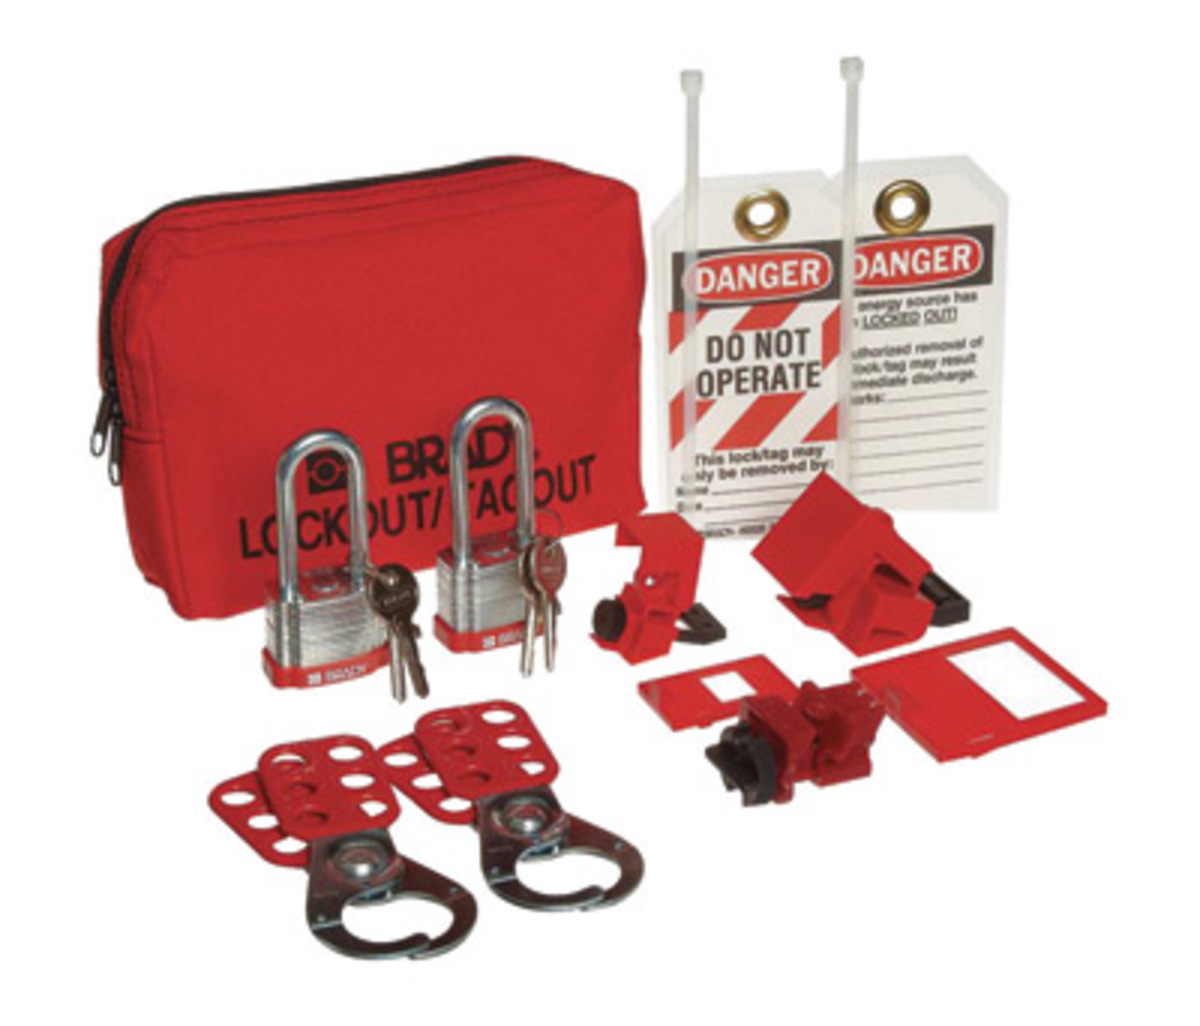 Master Lock® Personal Electrical Valve Lockout Kit Includes (4) Padlocks, (2) Hasps, (2) Gate Valve Covers, (3) Lockouts, (5) Gr